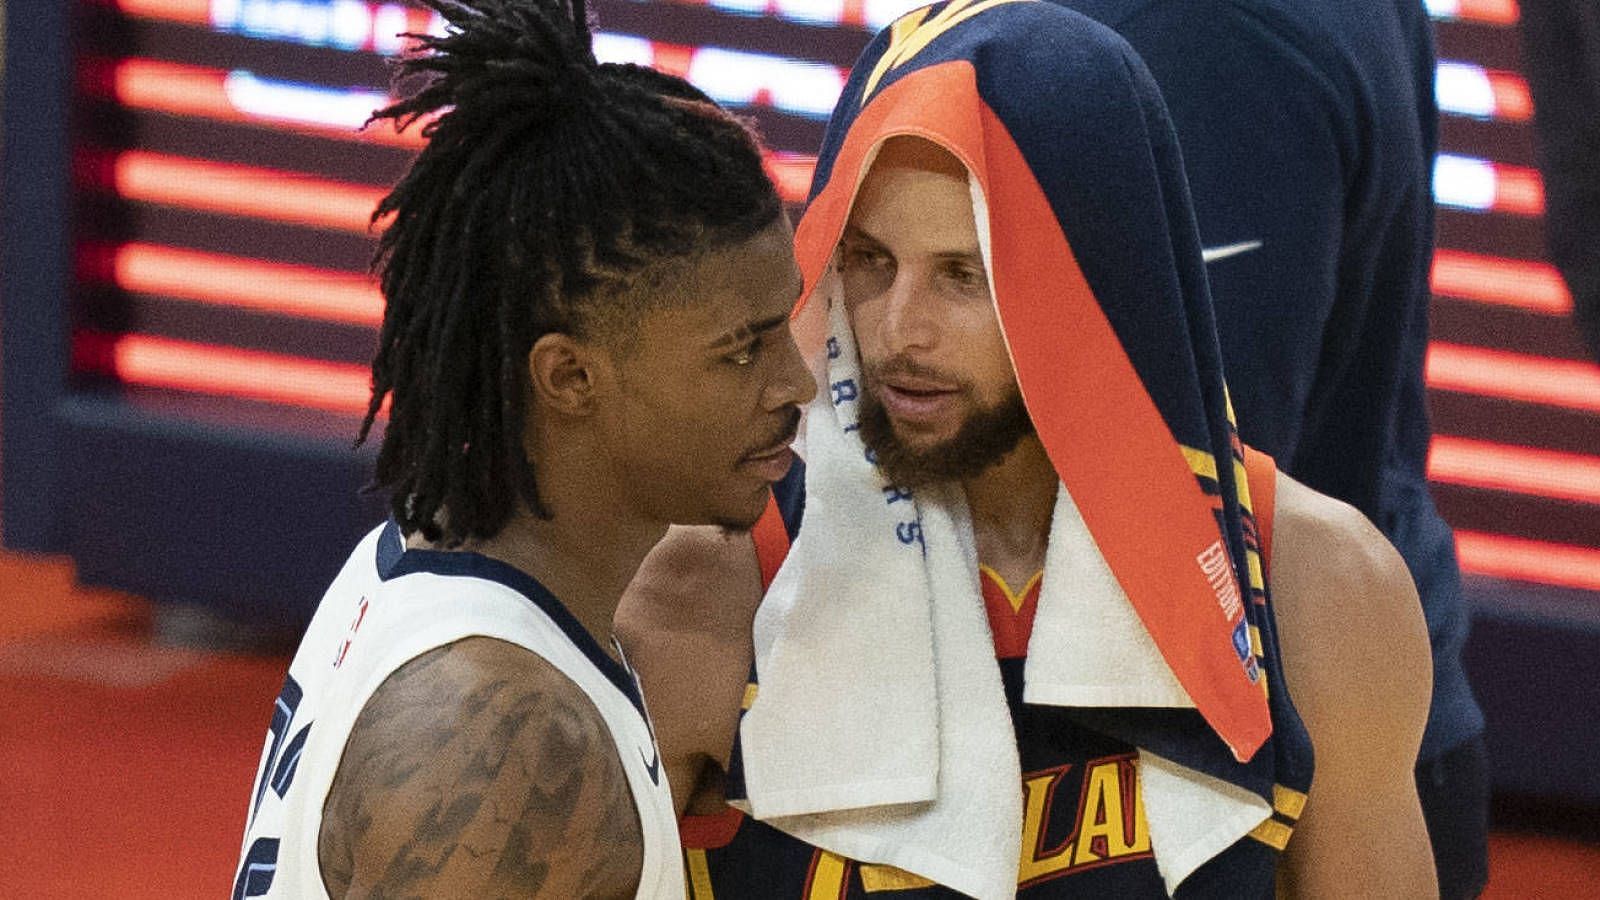 The Memphis Grizzlies&#039; young superstar isn&#039;t afraid of the biggest moments. [Photo: Yardbarker.com]